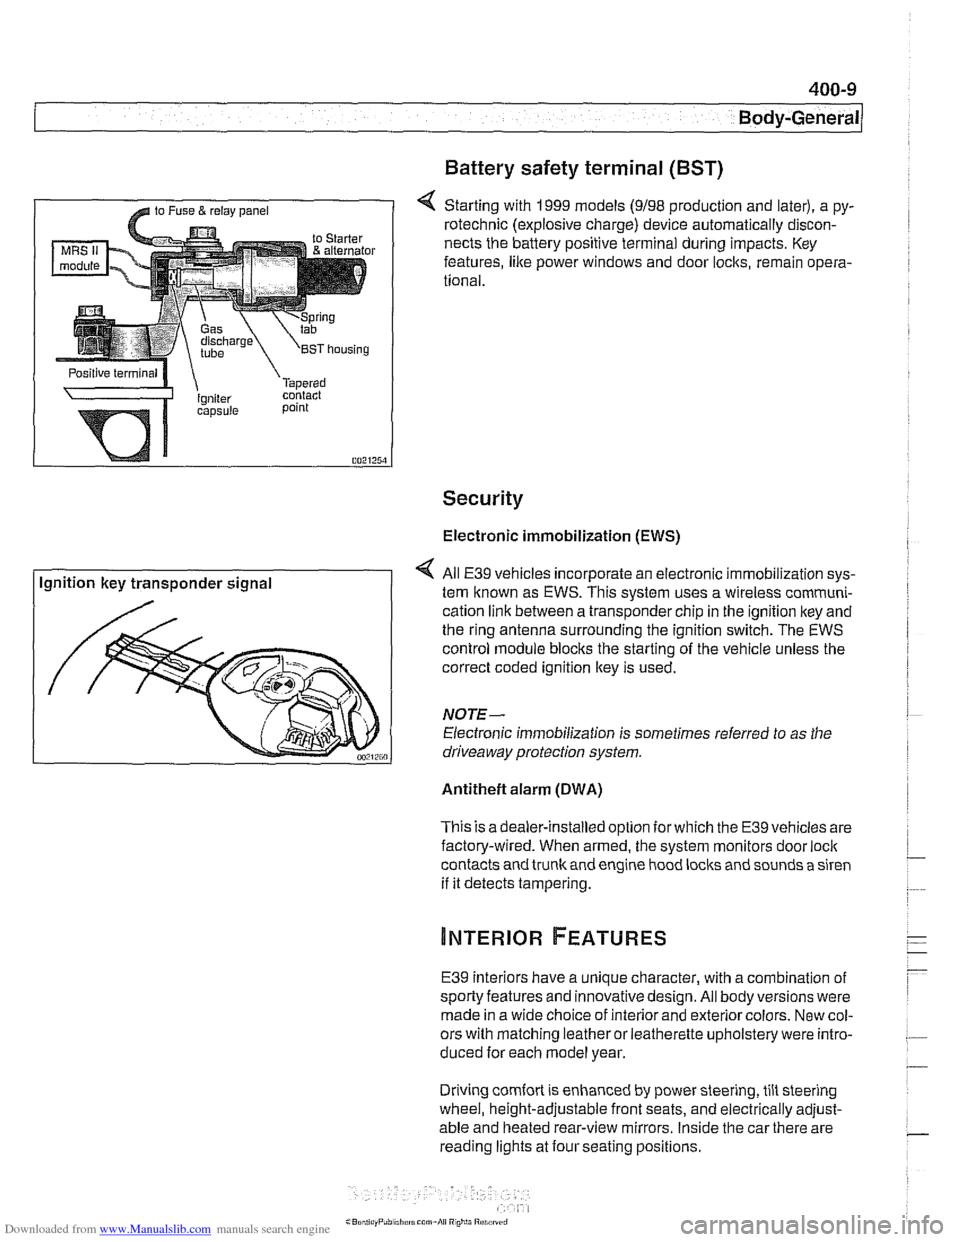 BMW 528i 1998 E39 Workshop Manual Downloaded from www.Manualslib.com manuals search engine 
400-9 
Body-General 
Battery  safety terminal 
(BST) 
4 Starting  with 1999 models (9198 production  and later), a py- 
rotechnic  (explosive 